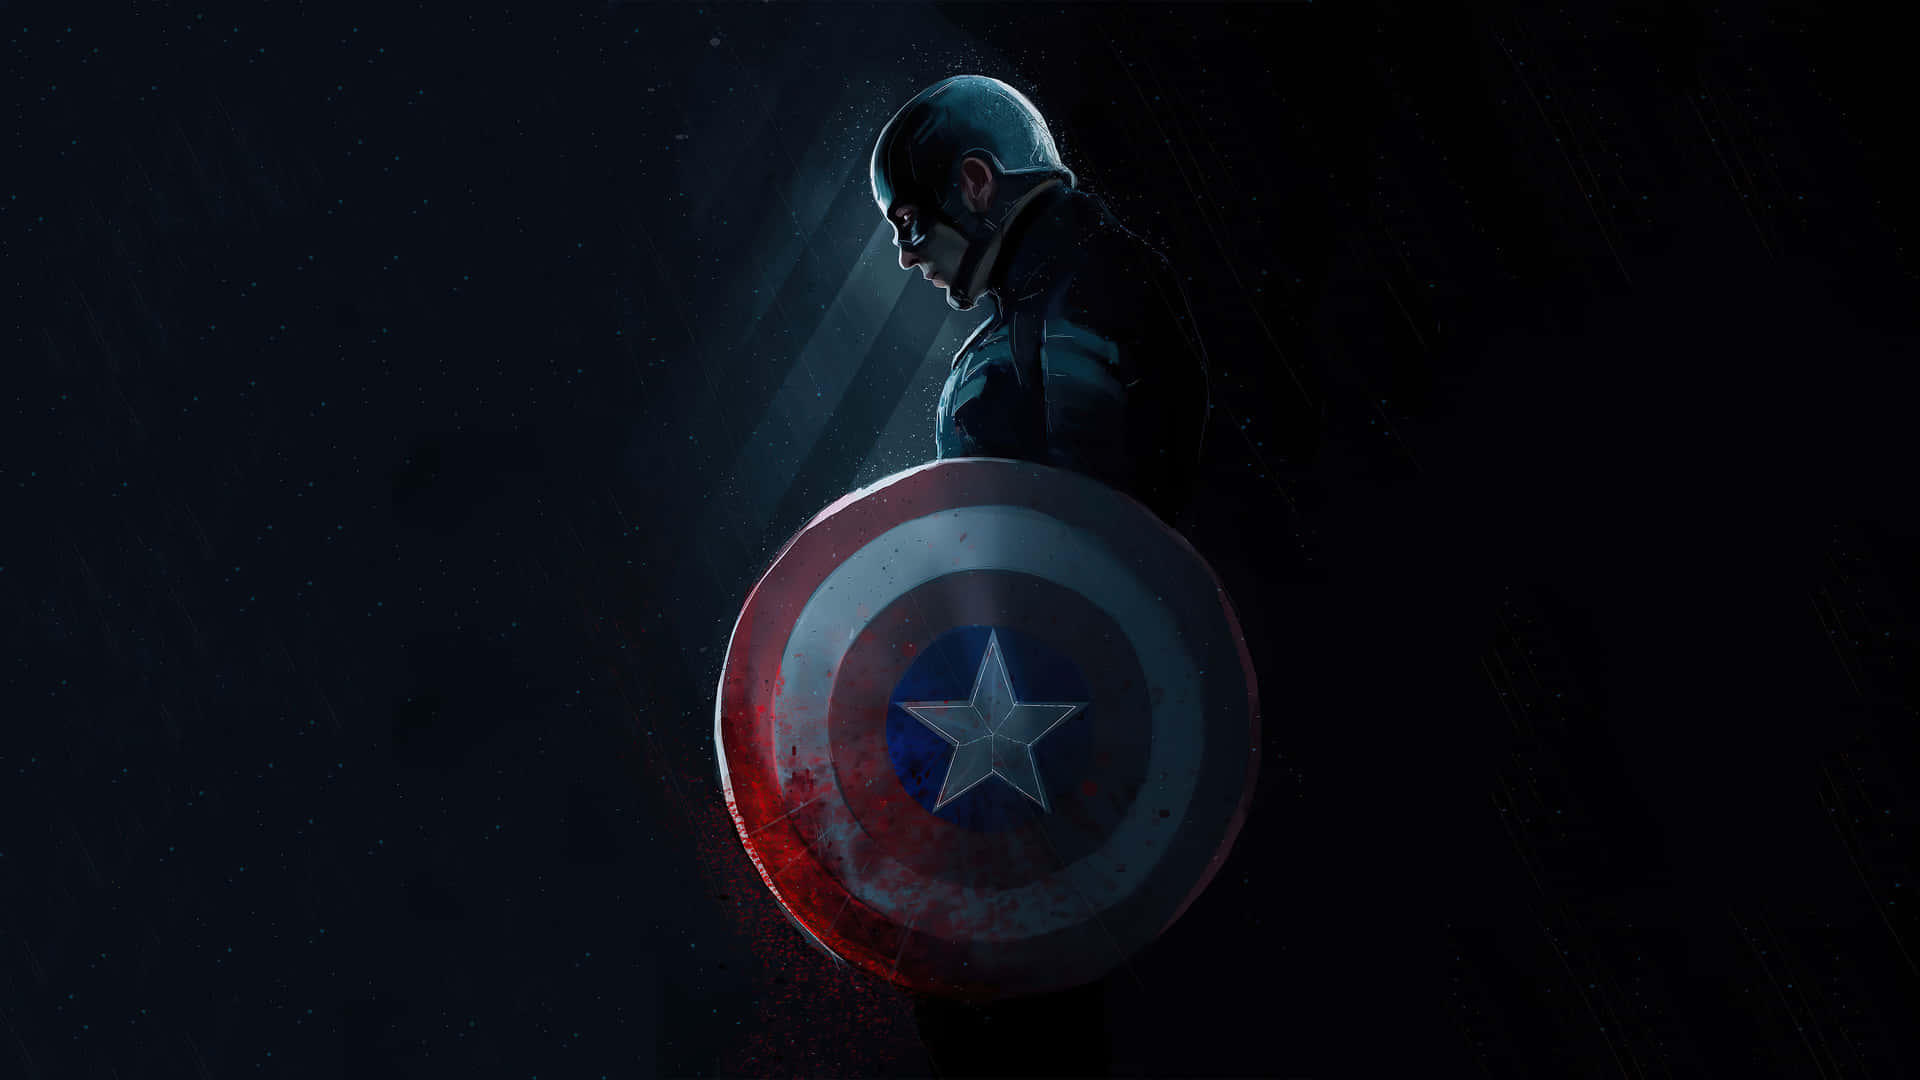 Join Captain America and save the world! Wallpaper